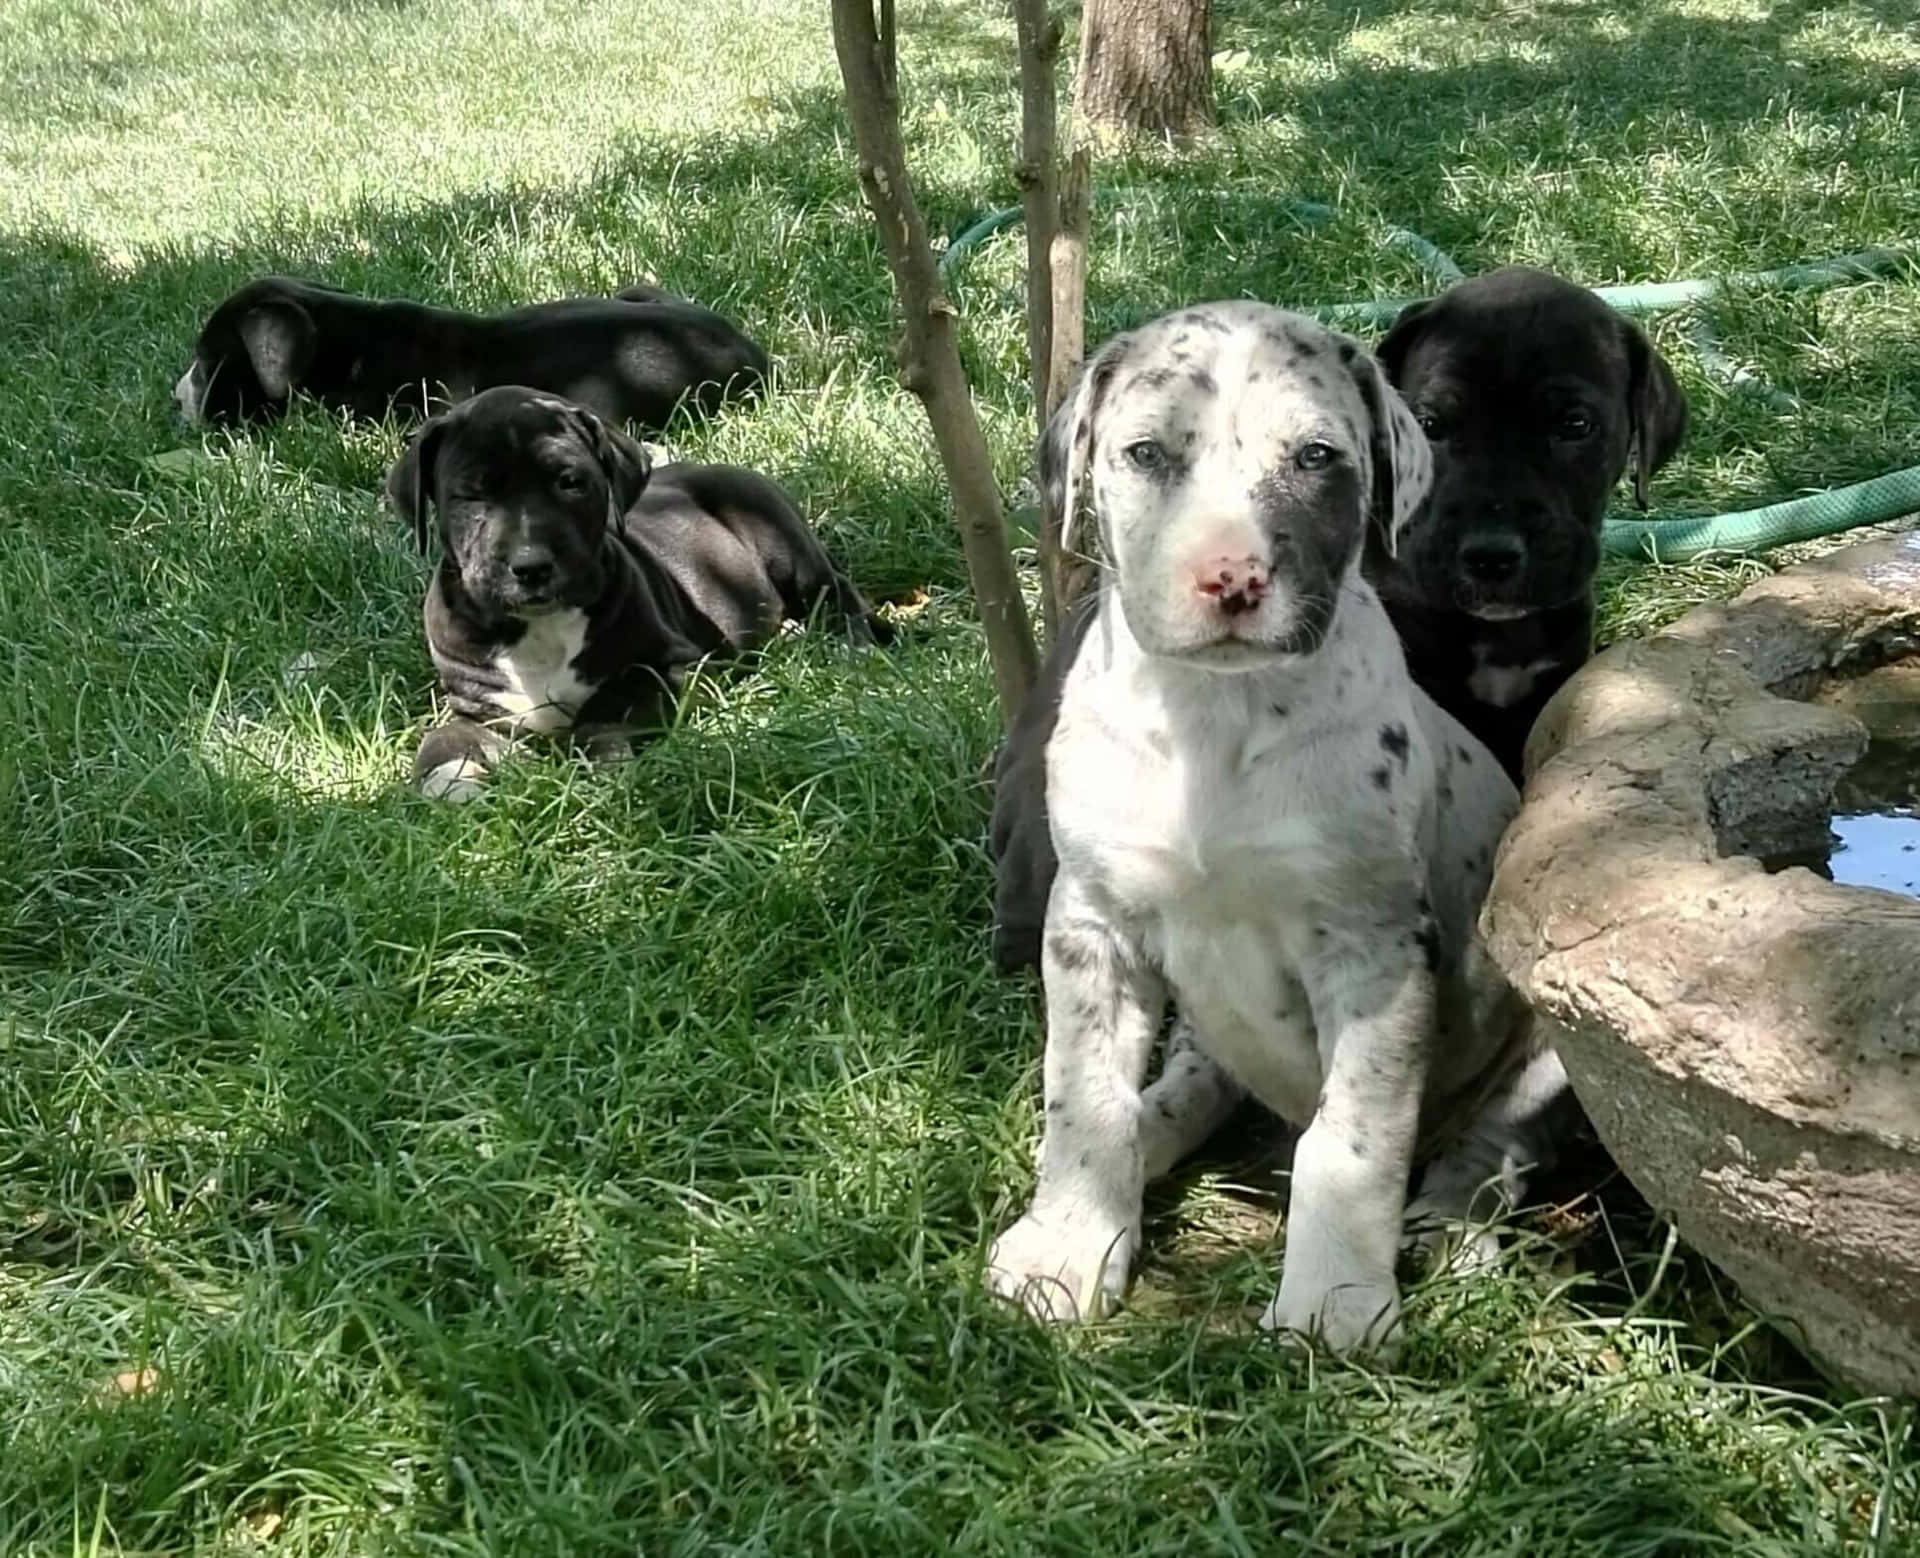 A Group Of Puppies Sitting In The Grass Near A Water Fountain